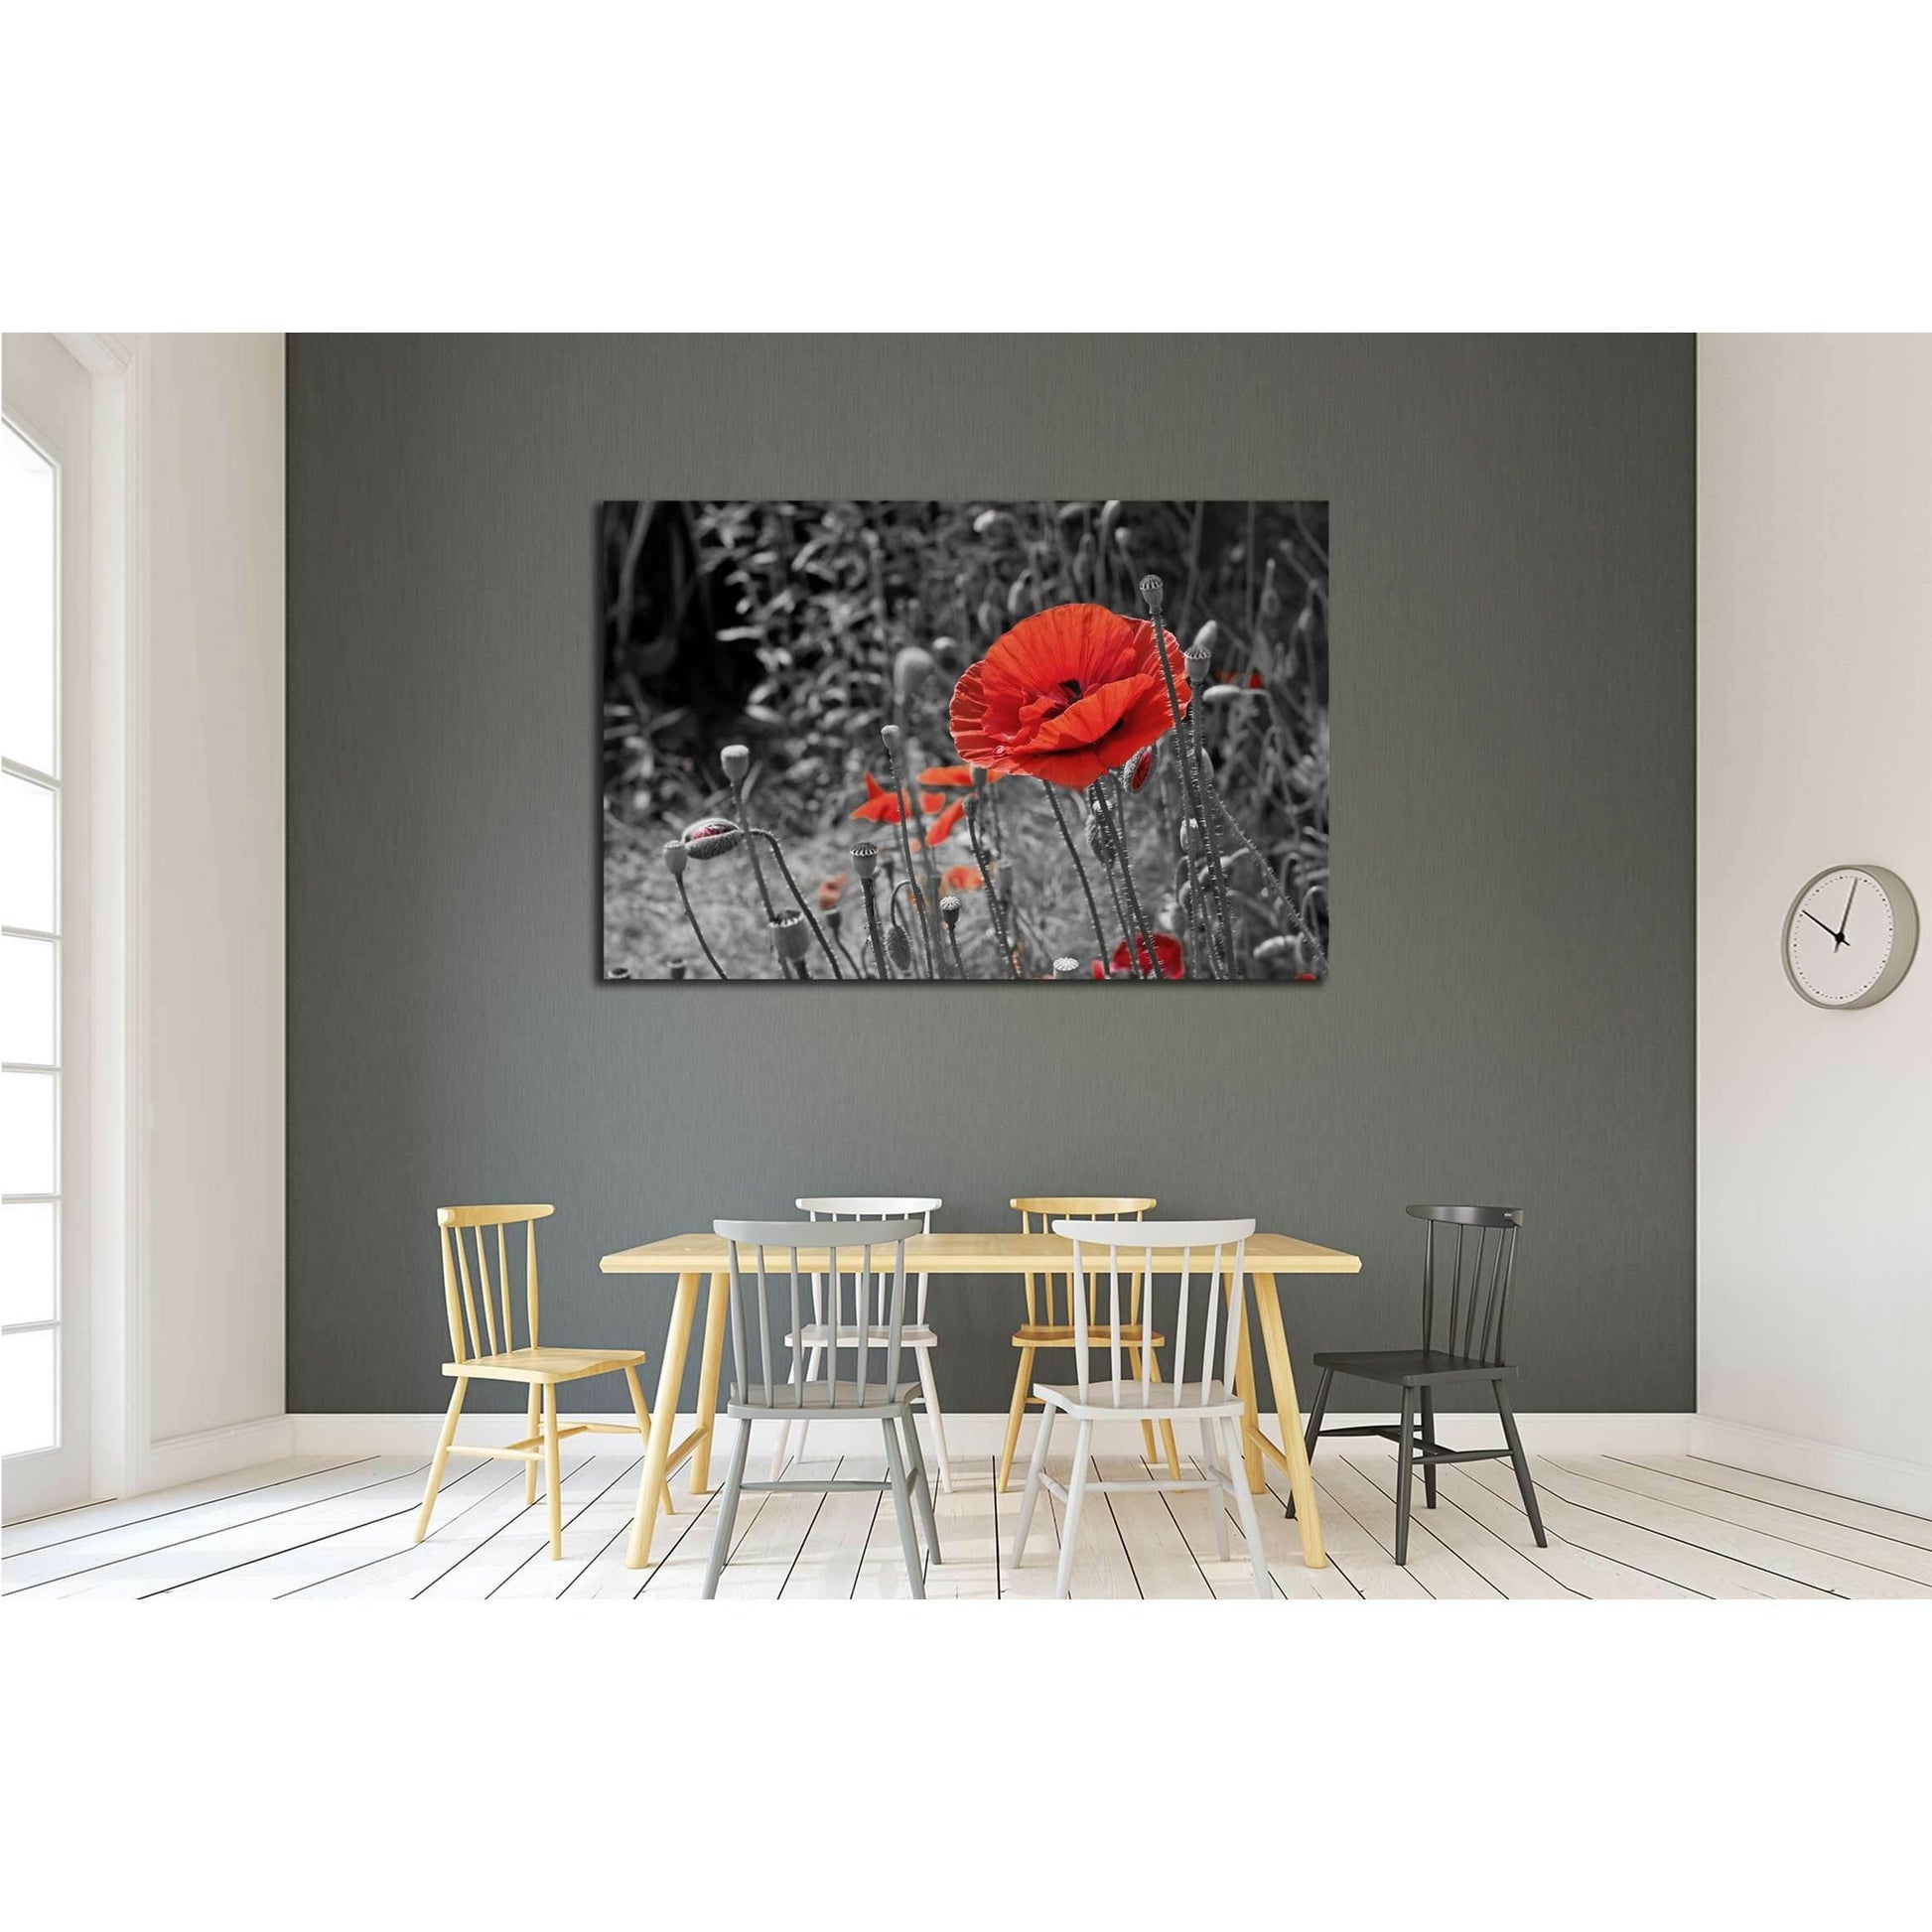 Vivid Red Poppies Canvas Art - Symbolic Nature DecorThis canvas print features a selective color technique highlighting vibrant red poppies against a monochrome background, bringing a striking contrast that draws the eye. The poppies, symbolizing remembra